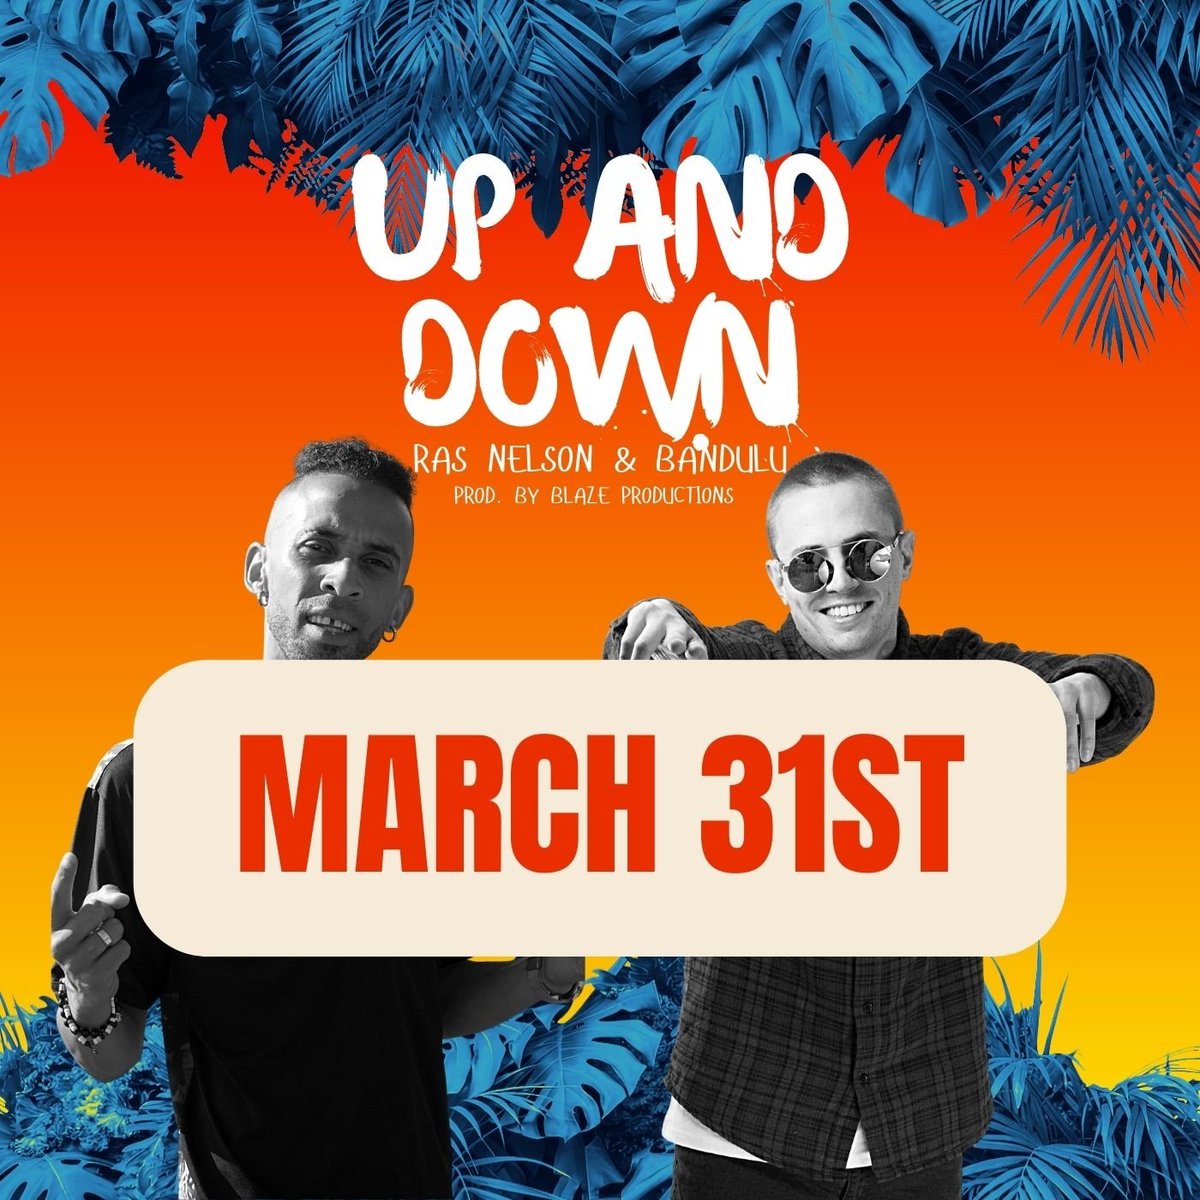 Release date of my new Reggae single 'Up And Down' together with @ras_nelson_ is March 31❗🎶🆙 Produced by @blazin3000 🙏🏼 Special thanks to @anotha1productions 💯😎 #newtune #reggae #reggaemusic #international #capeverde #norway #uk #austria #jamaica #upanddown